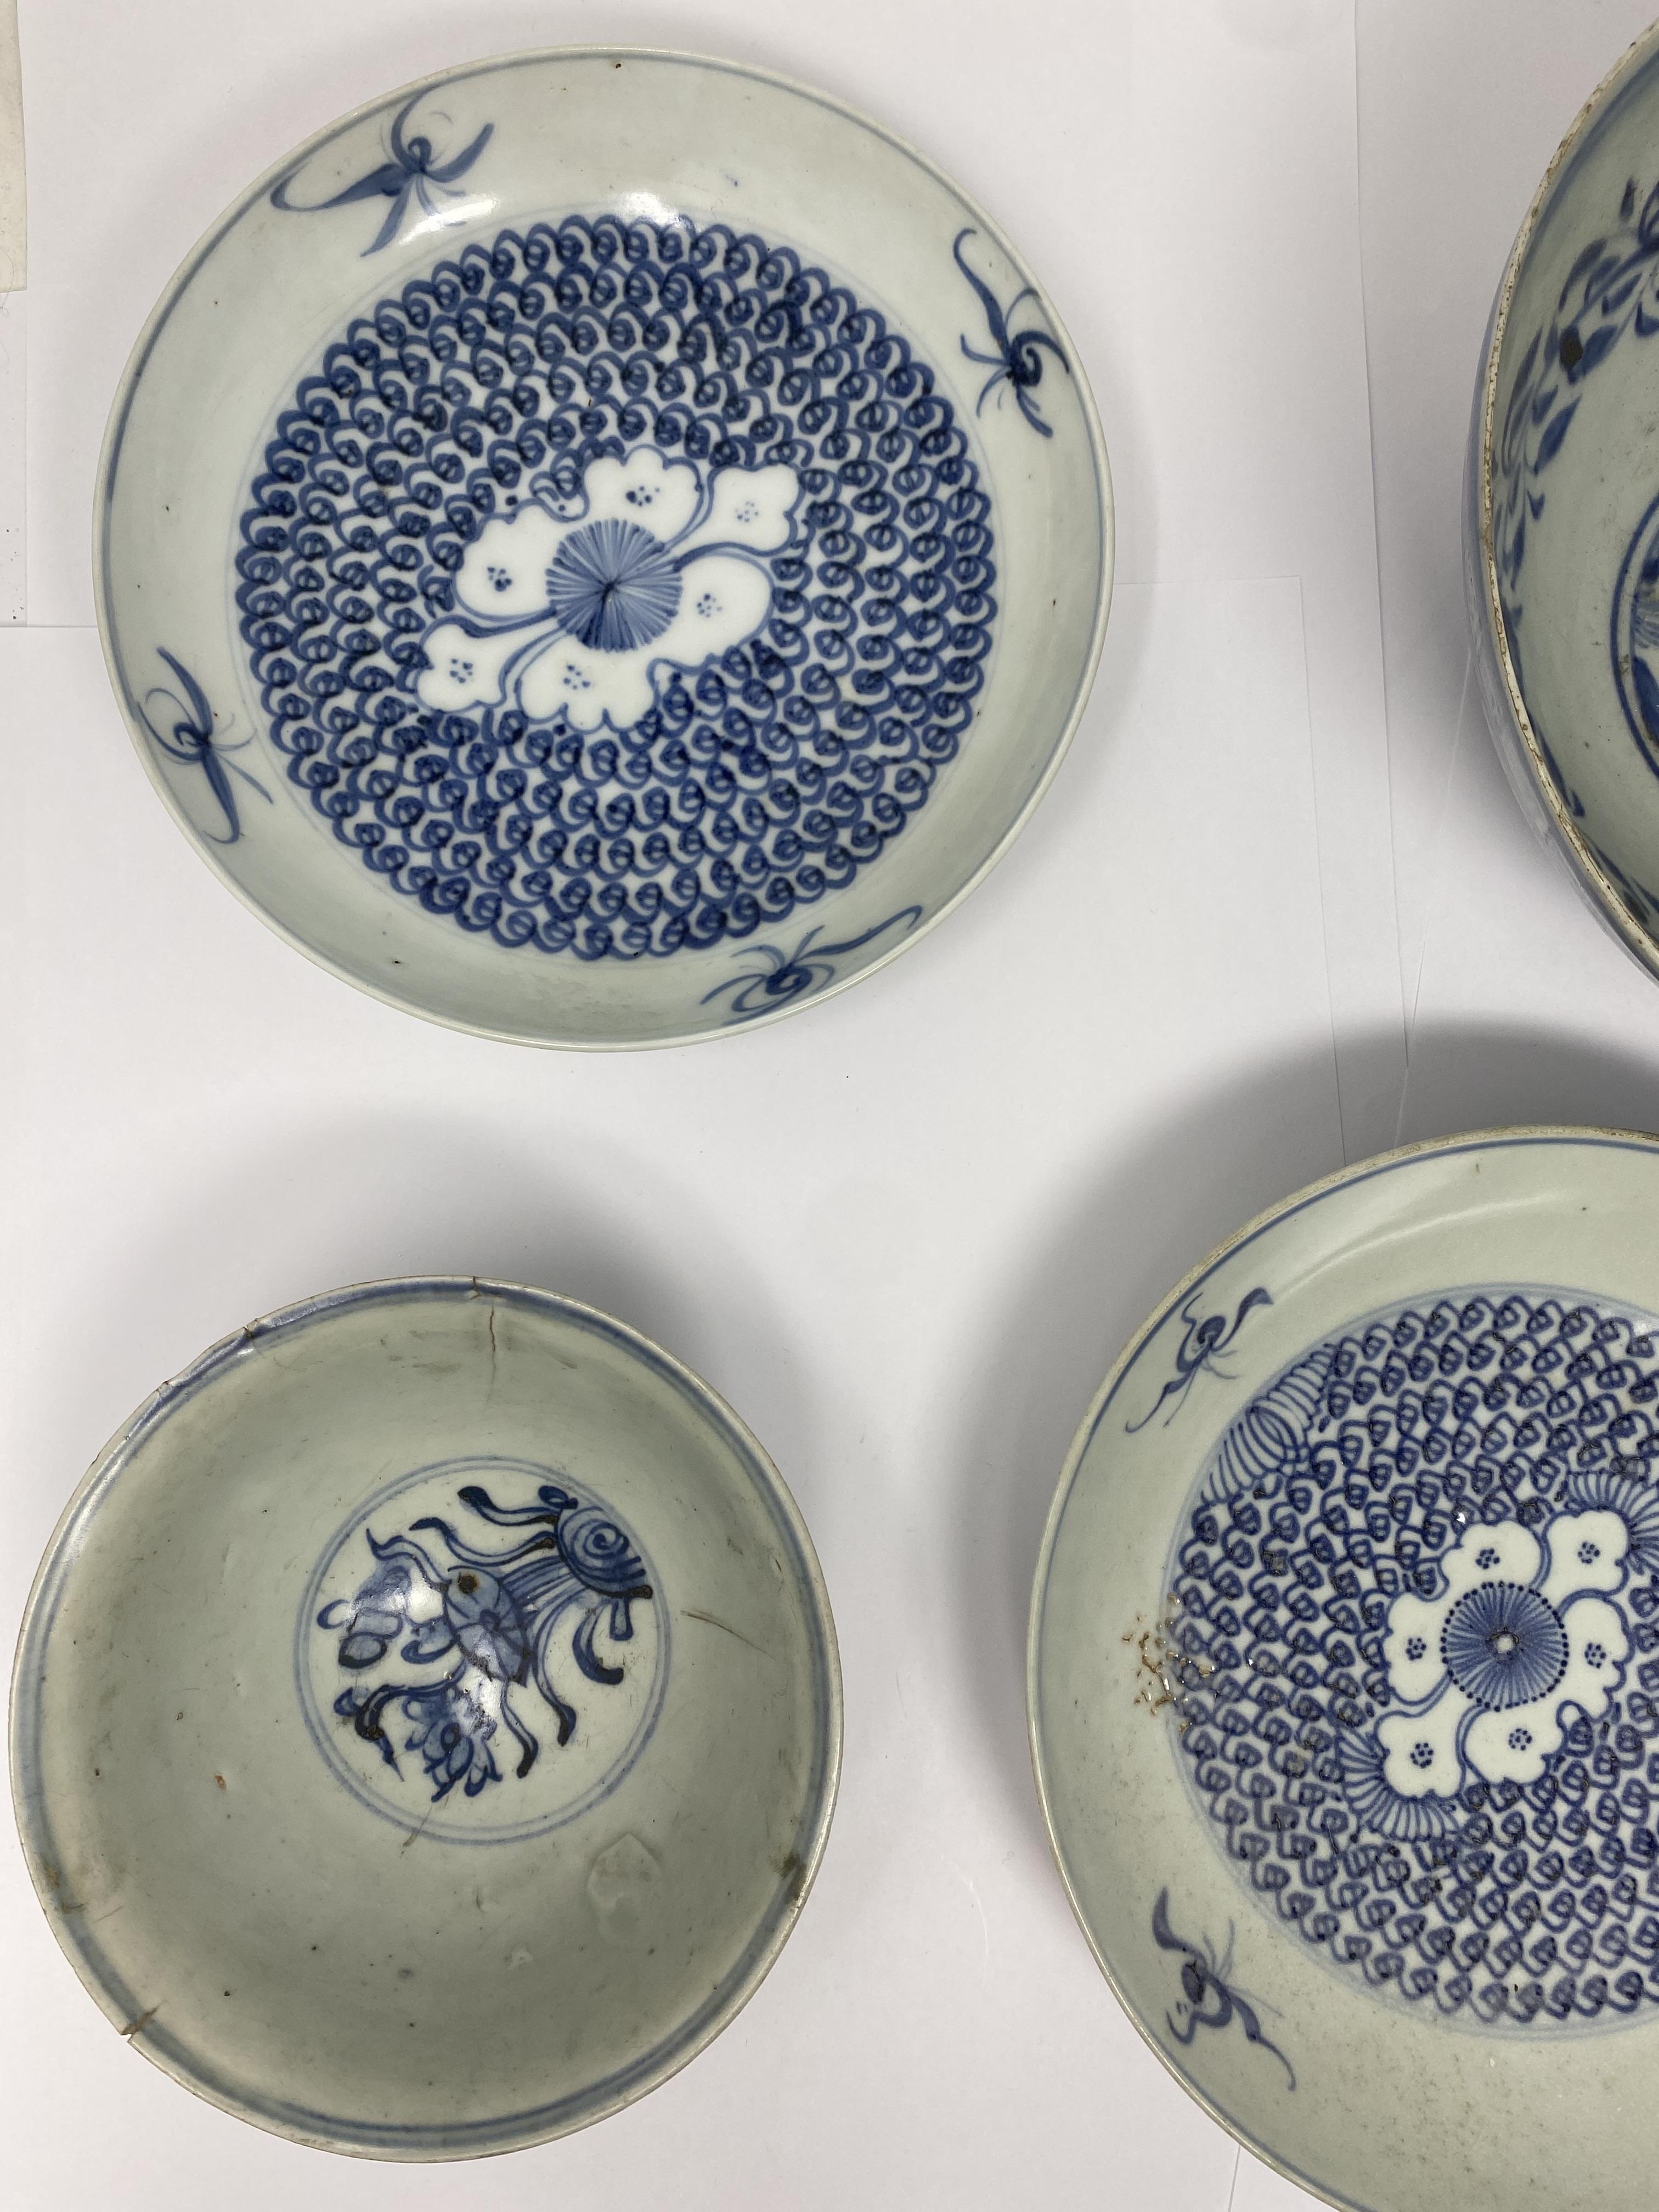 A LARGE CHINESE BLUE AND WHITE ‘PEONY SCROLL’ BOWL, MING DYNASTY - Image 3 of 5